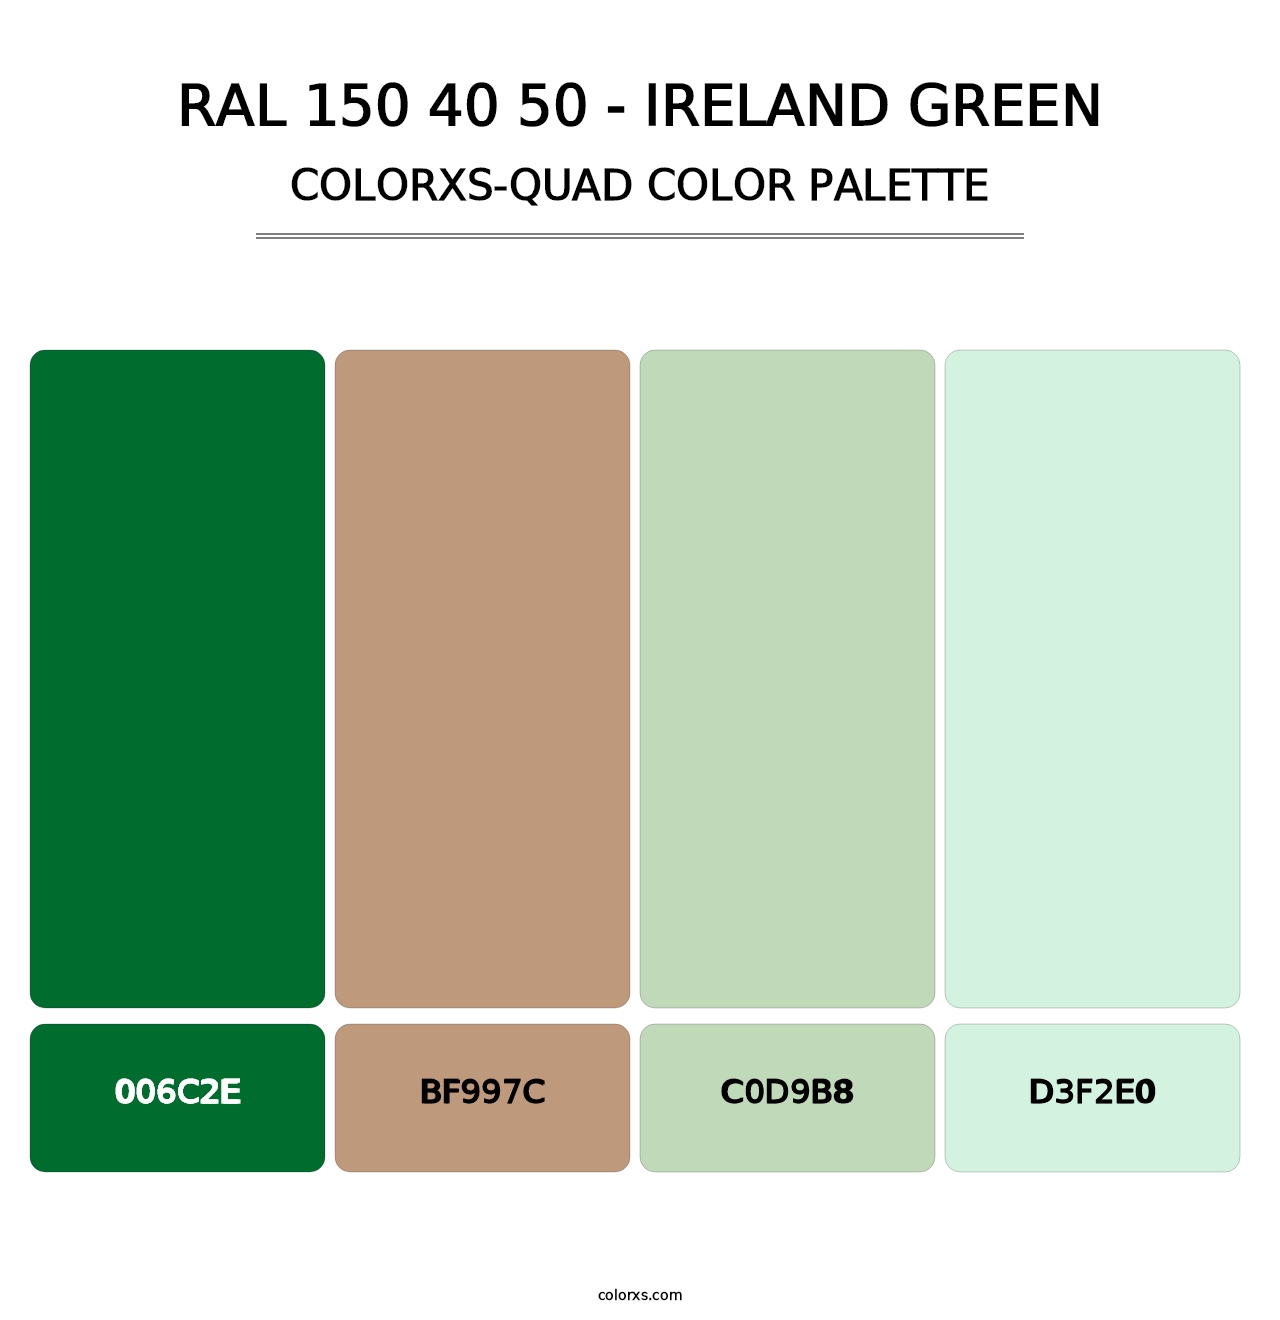 RAL 150 40 50 - Ireland Green - Colorxs Quad Palette